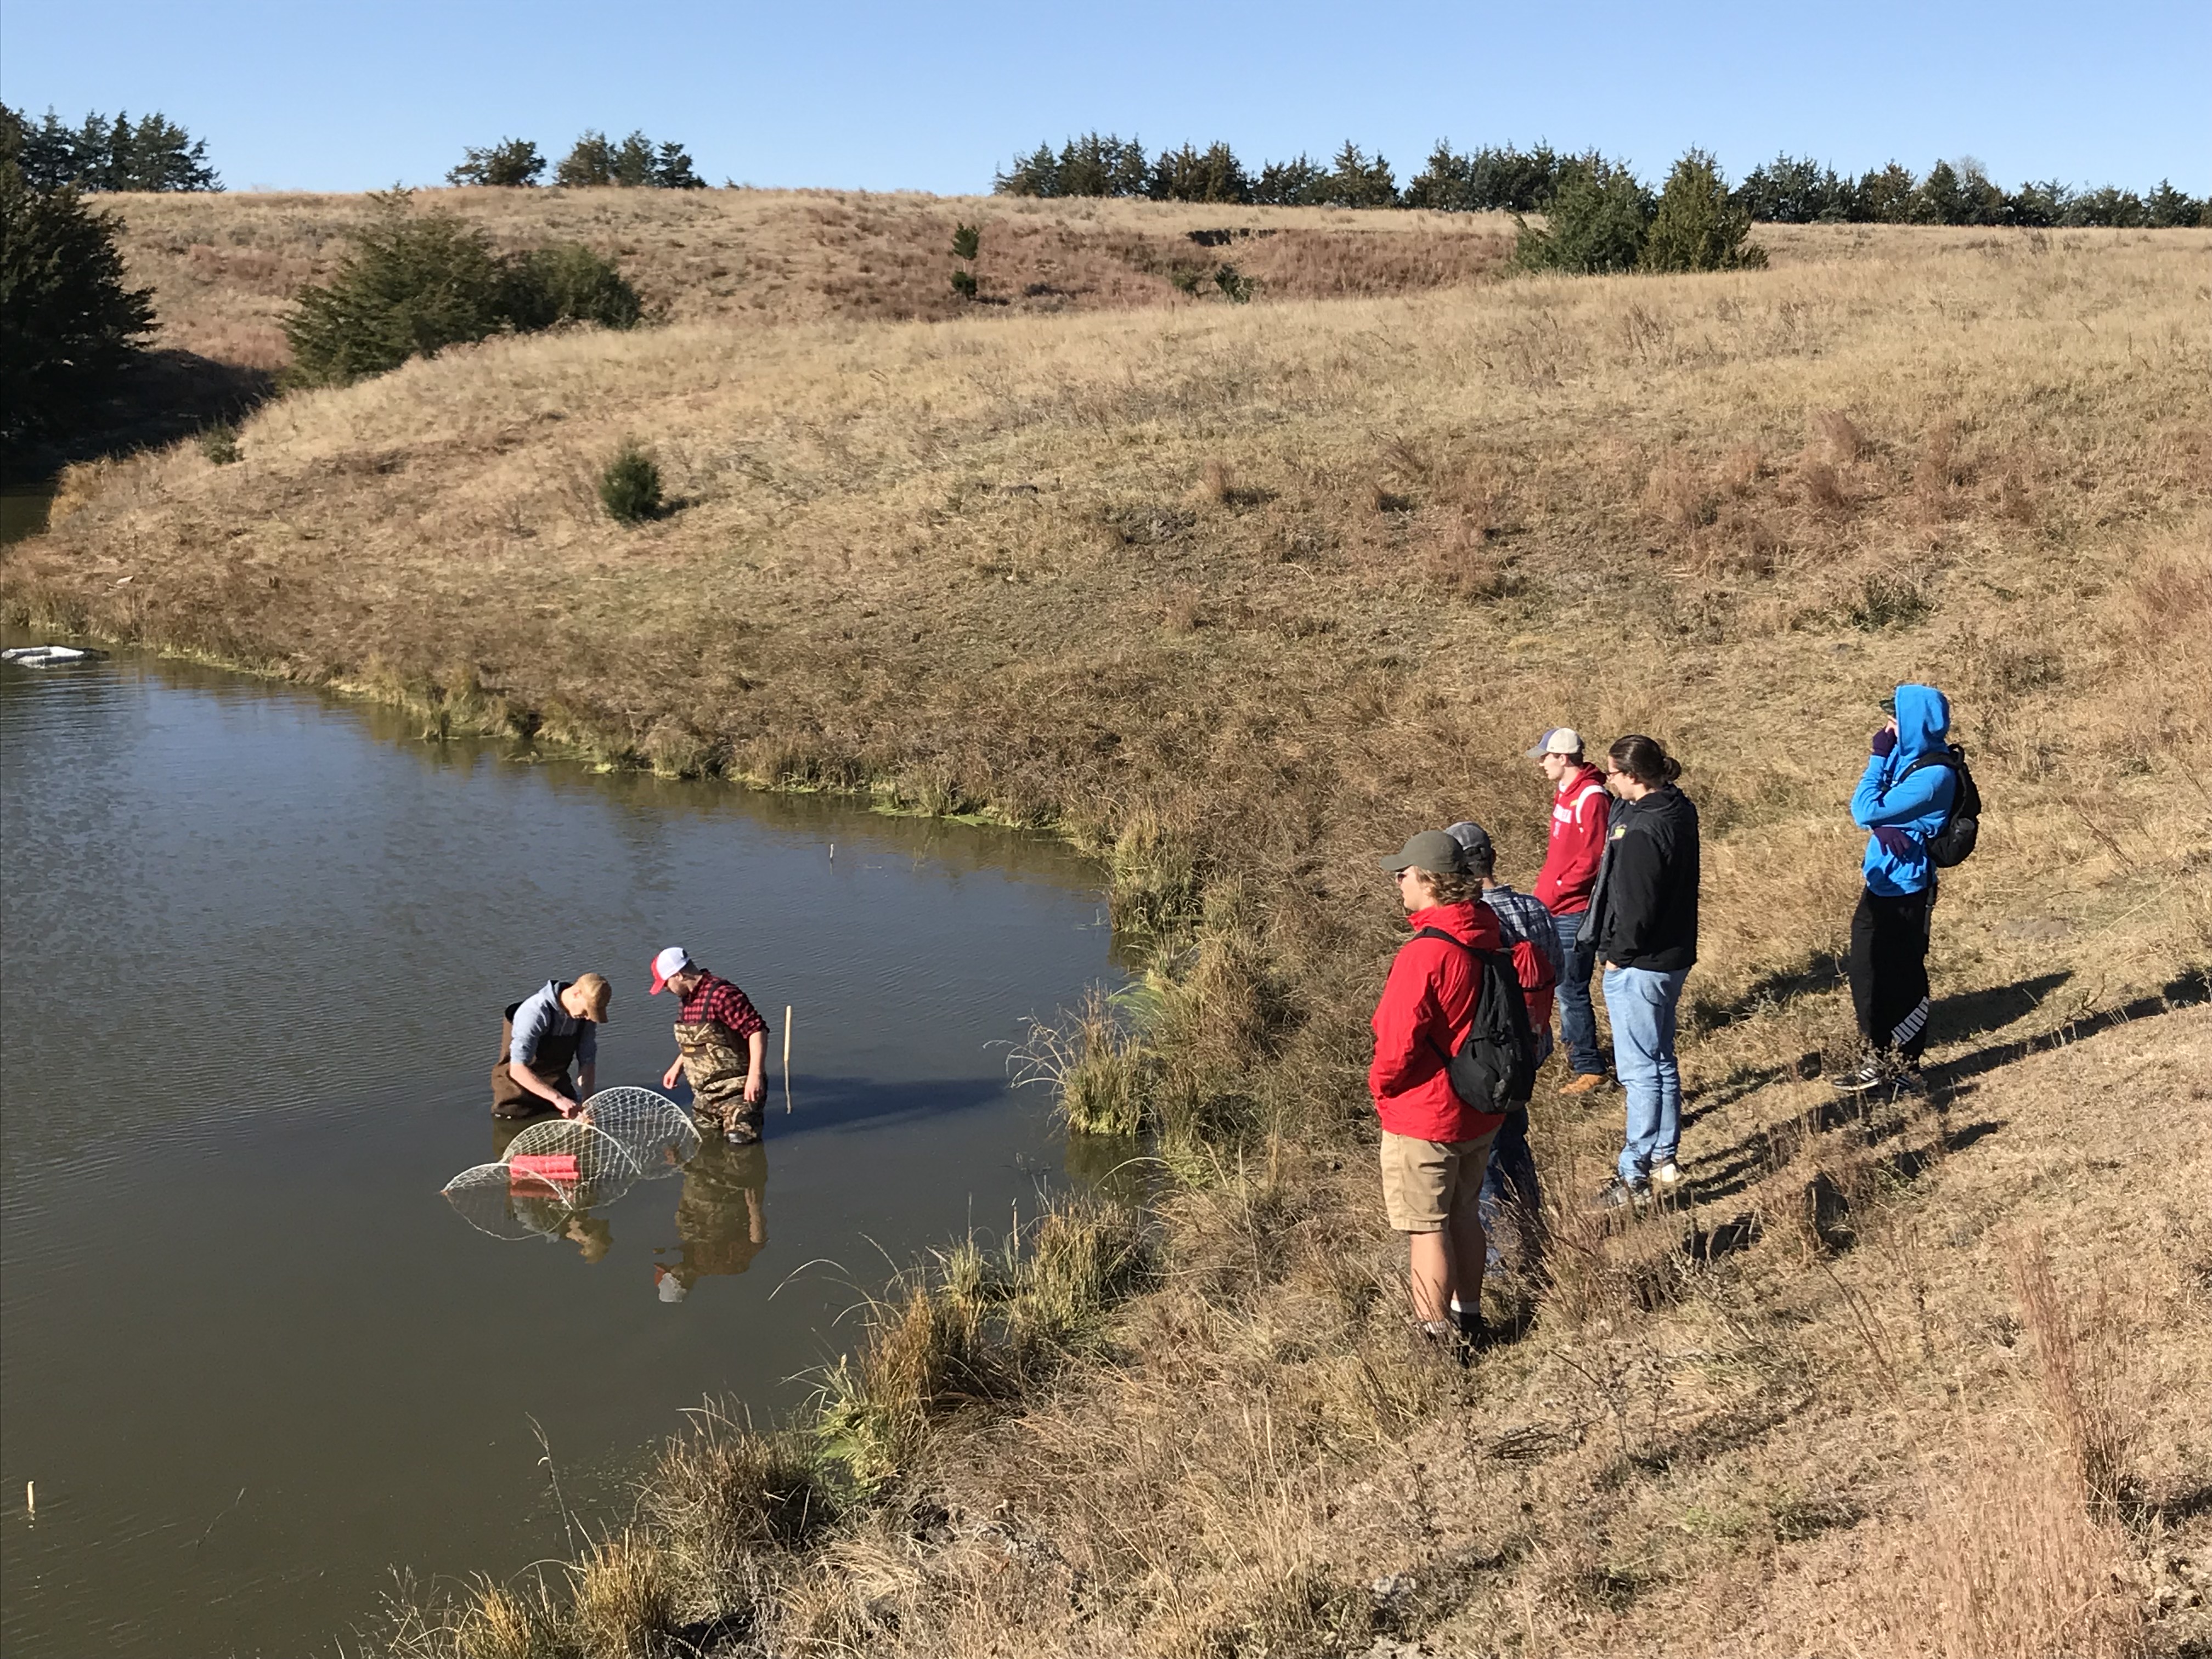 In 2022, the University of Nebraska-Lincoln's School of Natural Resources programming will be showcased when it hosts the 14th Biennial Conference on University Education in Natural Resources. Courtesy Larkin Powell